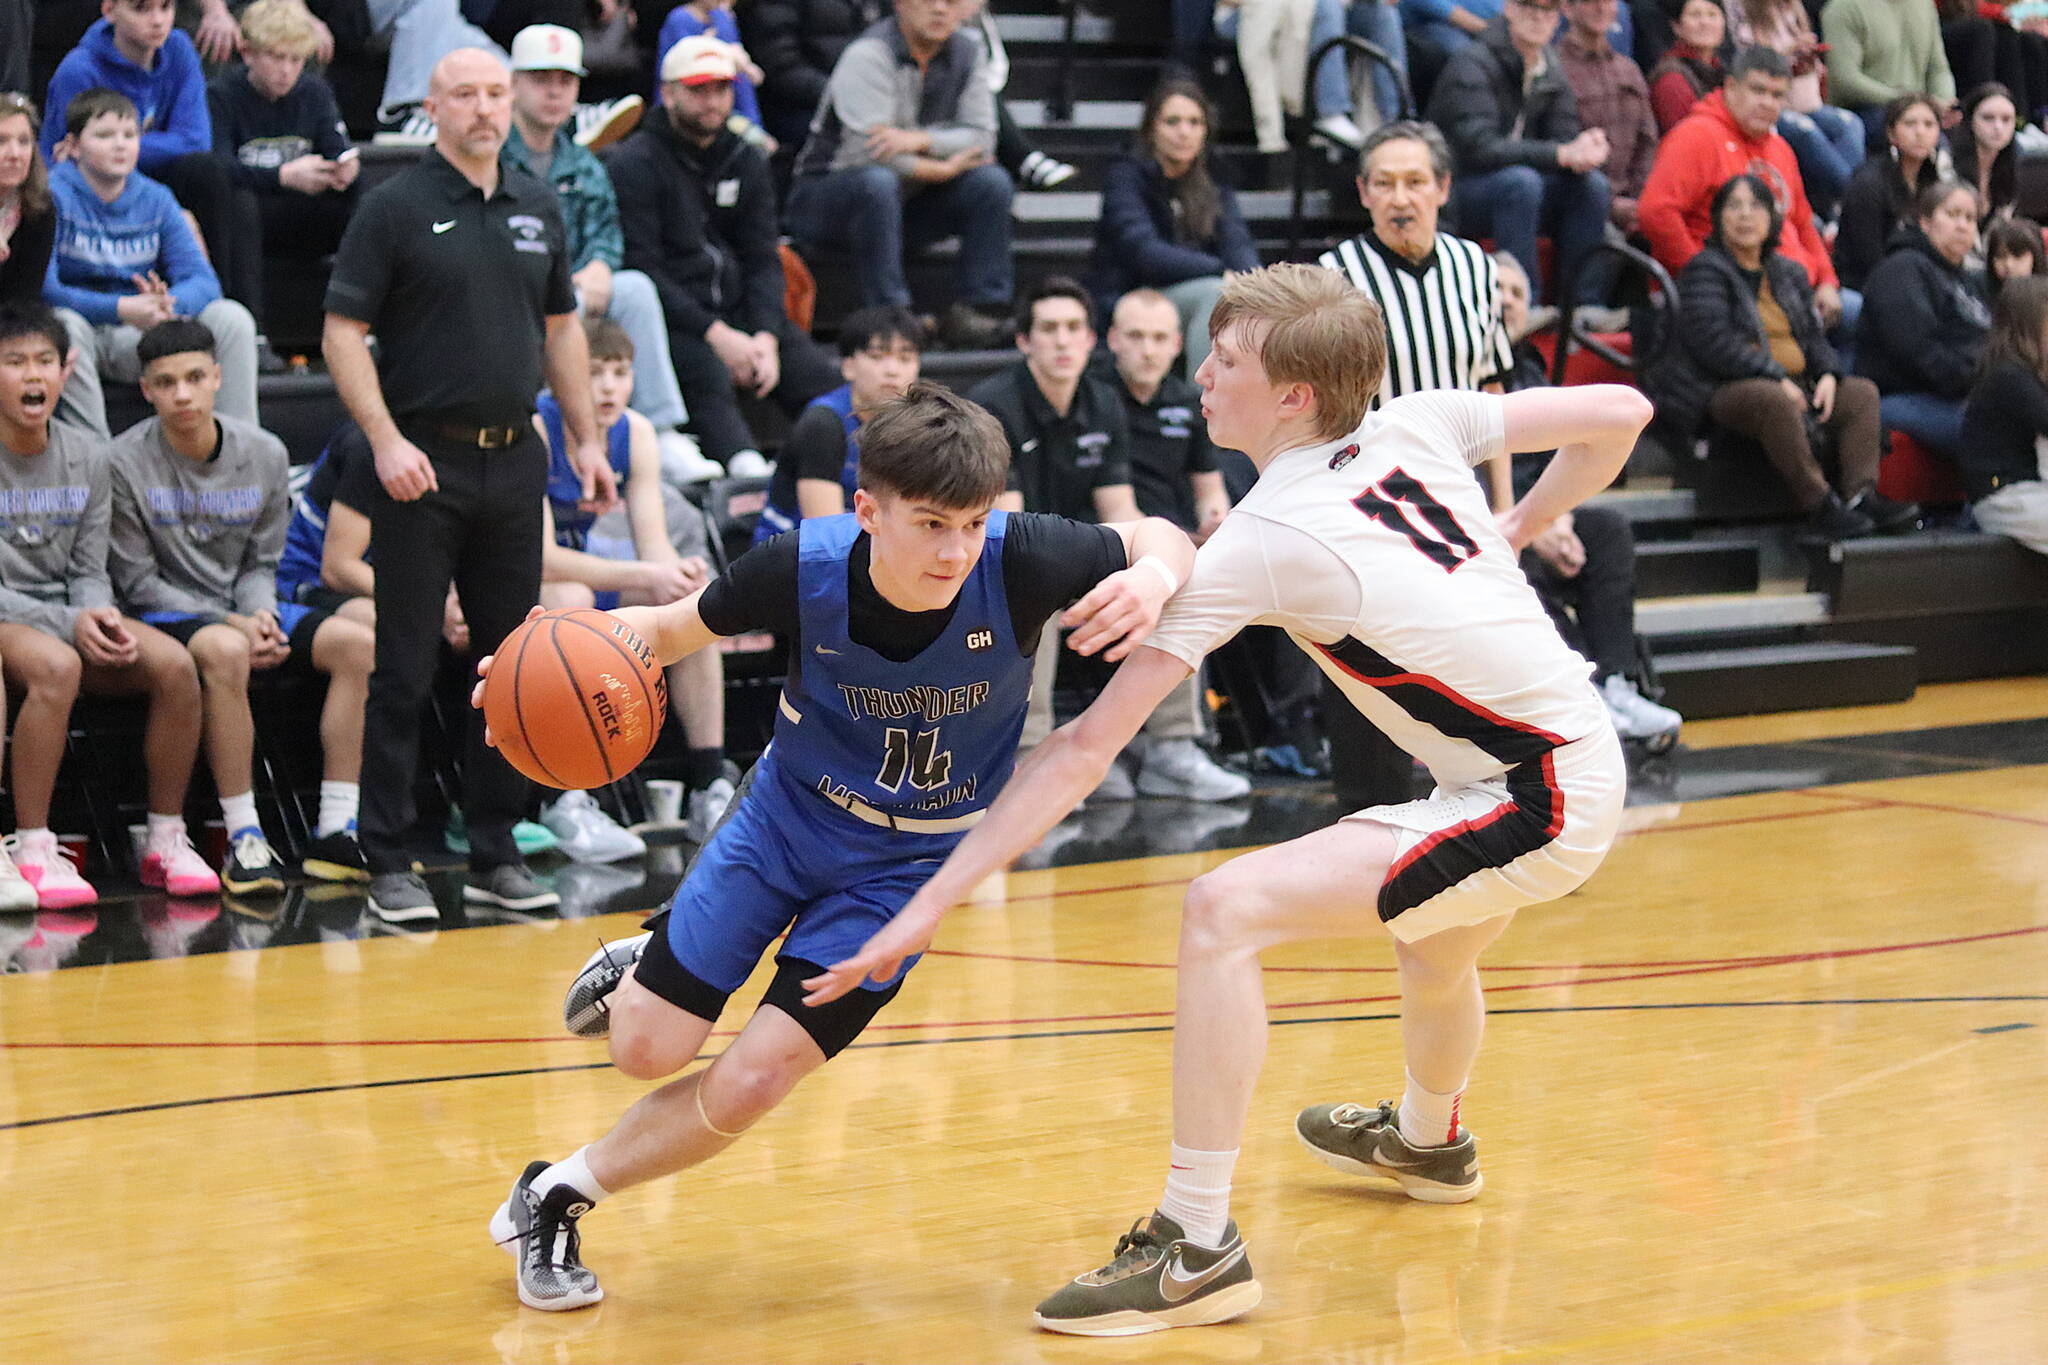 Samuel Lockhart (#14) of Thunder Mountain High School tries to get past Sean Oliver of Juneau-Douglas High School: Yadaa.at Kalé during Wednesday night’s game at JDHS. (Mark Sabbatini / Juneau Empire)